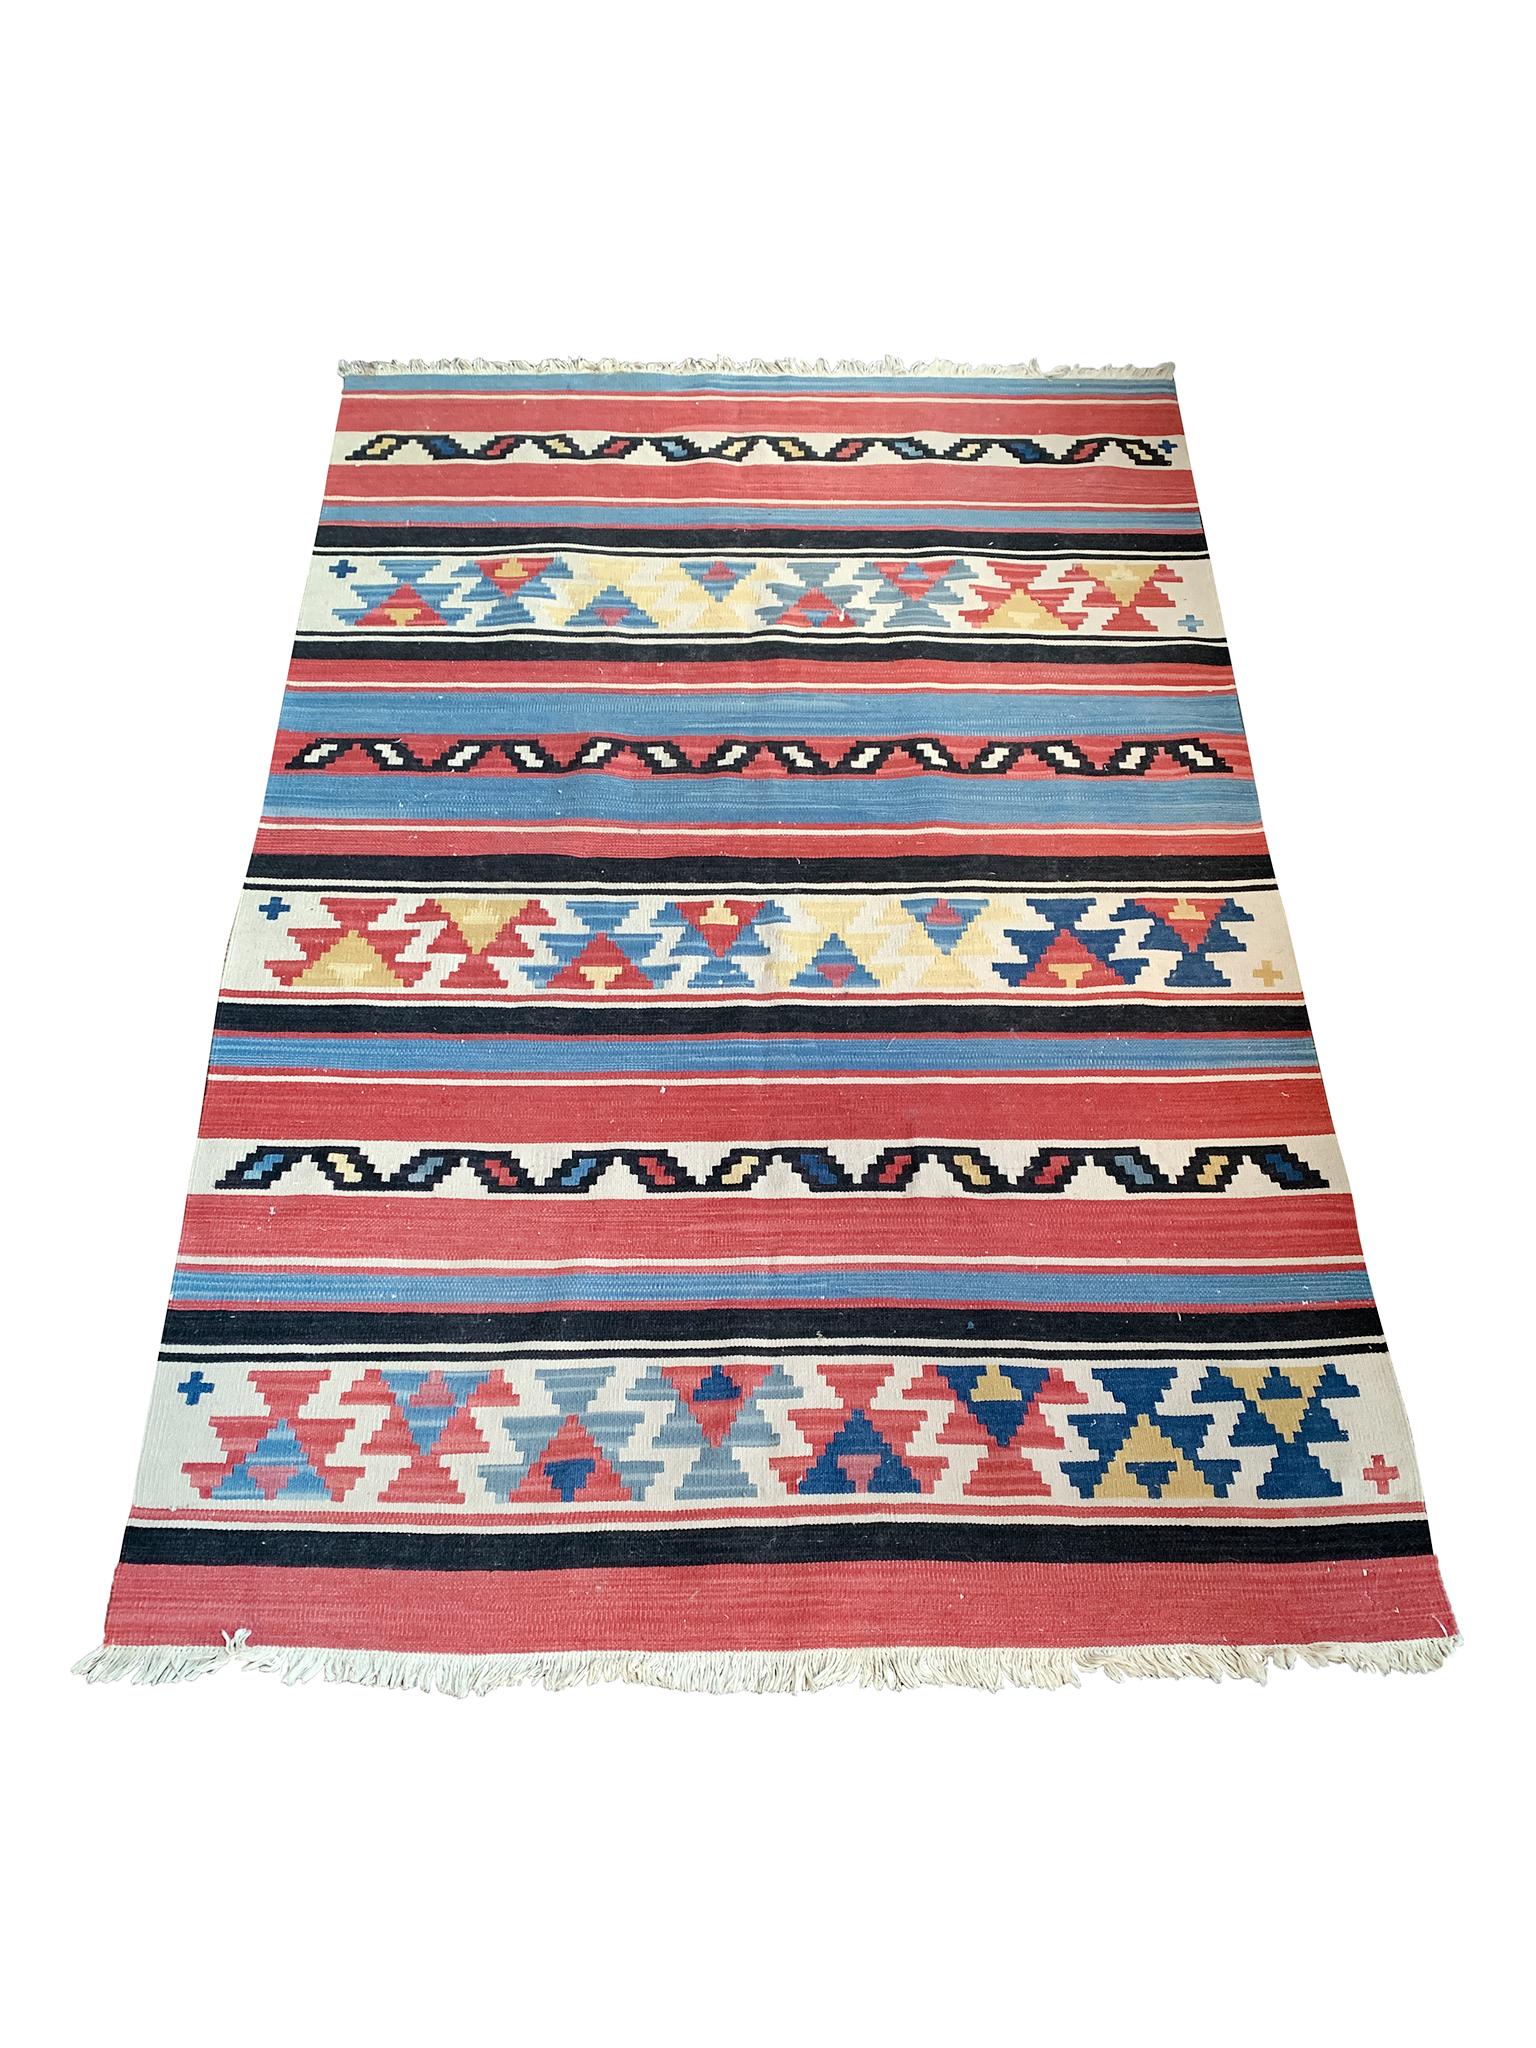 20th Century handwoven, striped Navajo rug with a bright palette of blue, red, yellow, ivory, and black.

Dimensions:
6' x 3' 11